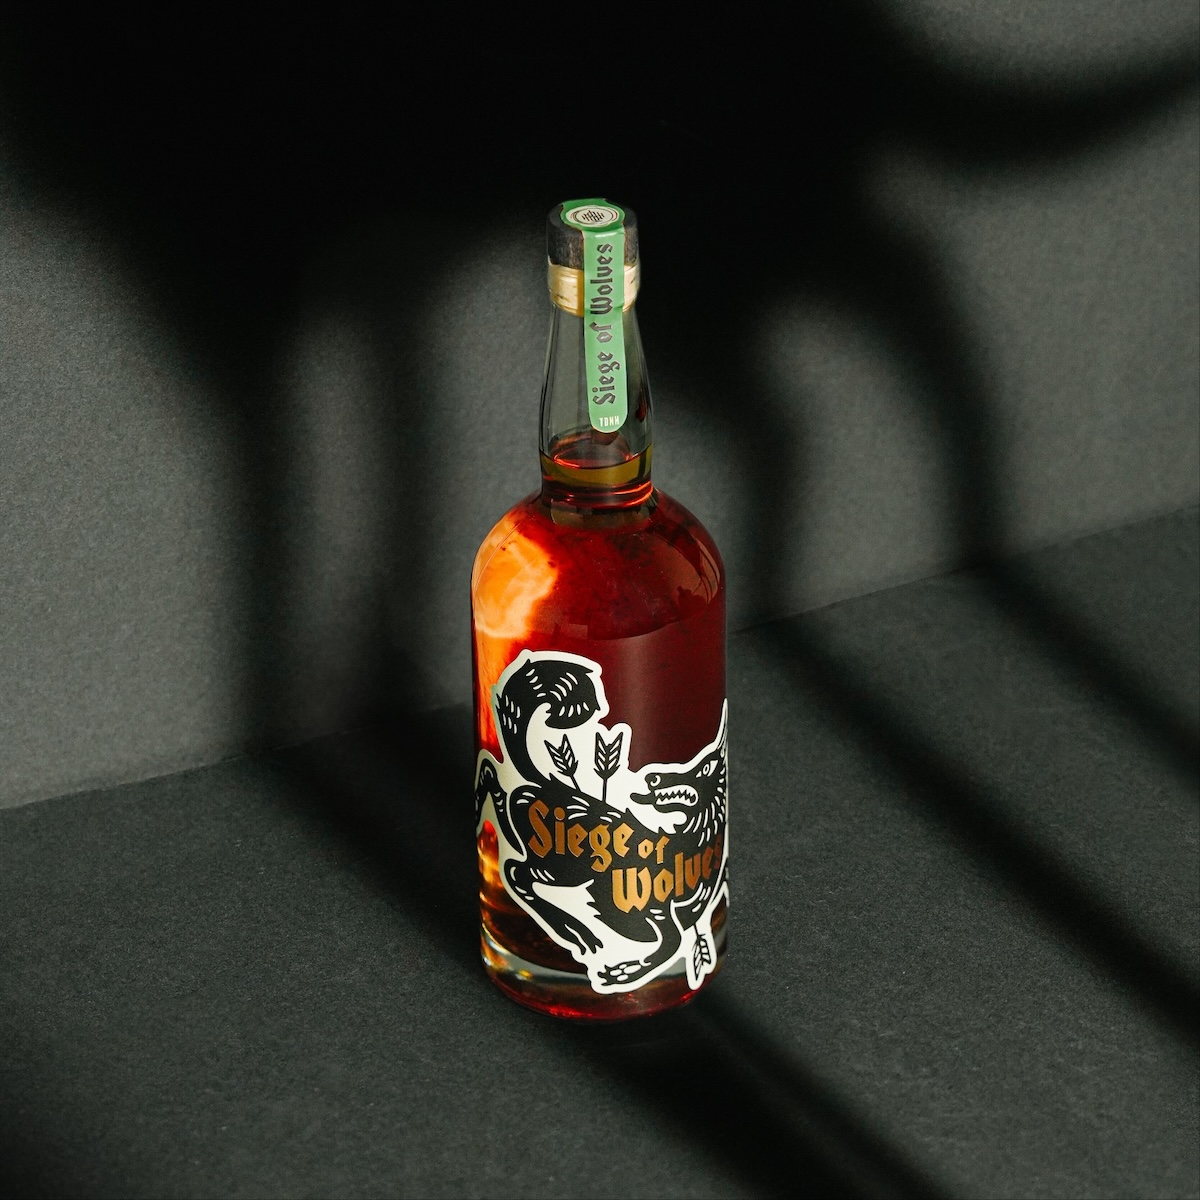 Art in the Age Spirits Siege of Wolves Spiced Rum and Dunce Bourbon Whiskey